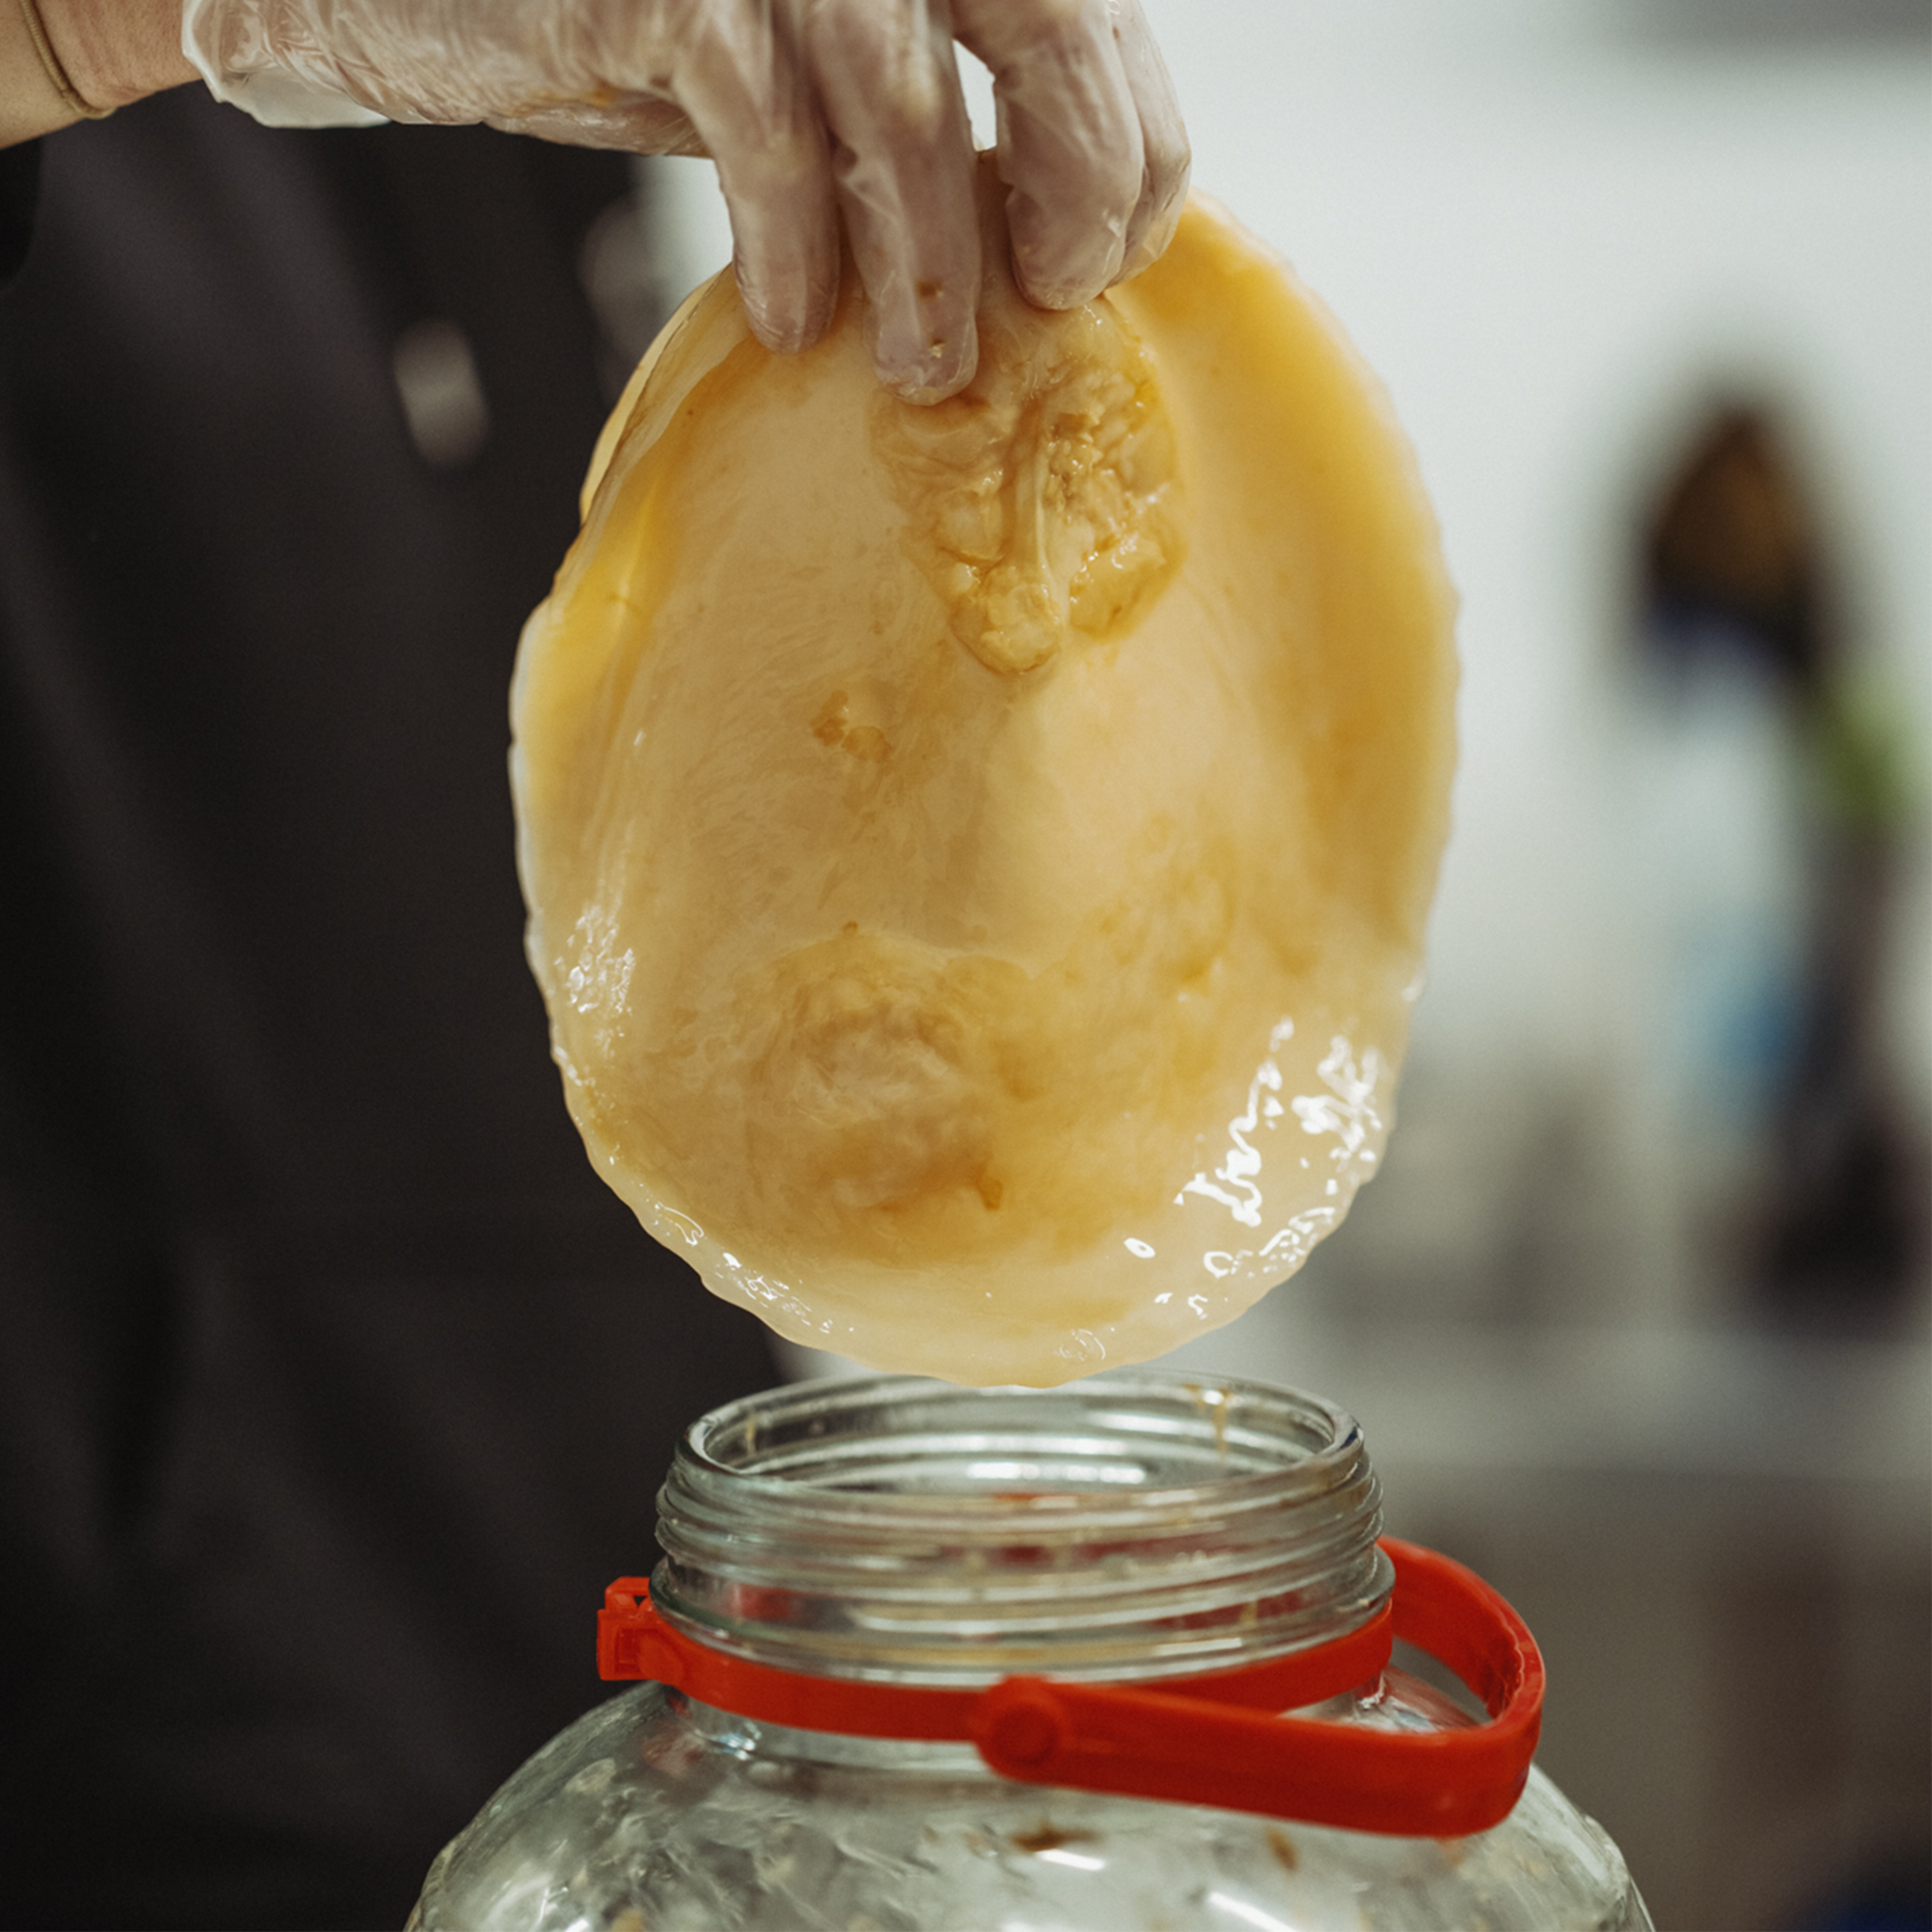 scoby being pulled out of a jar